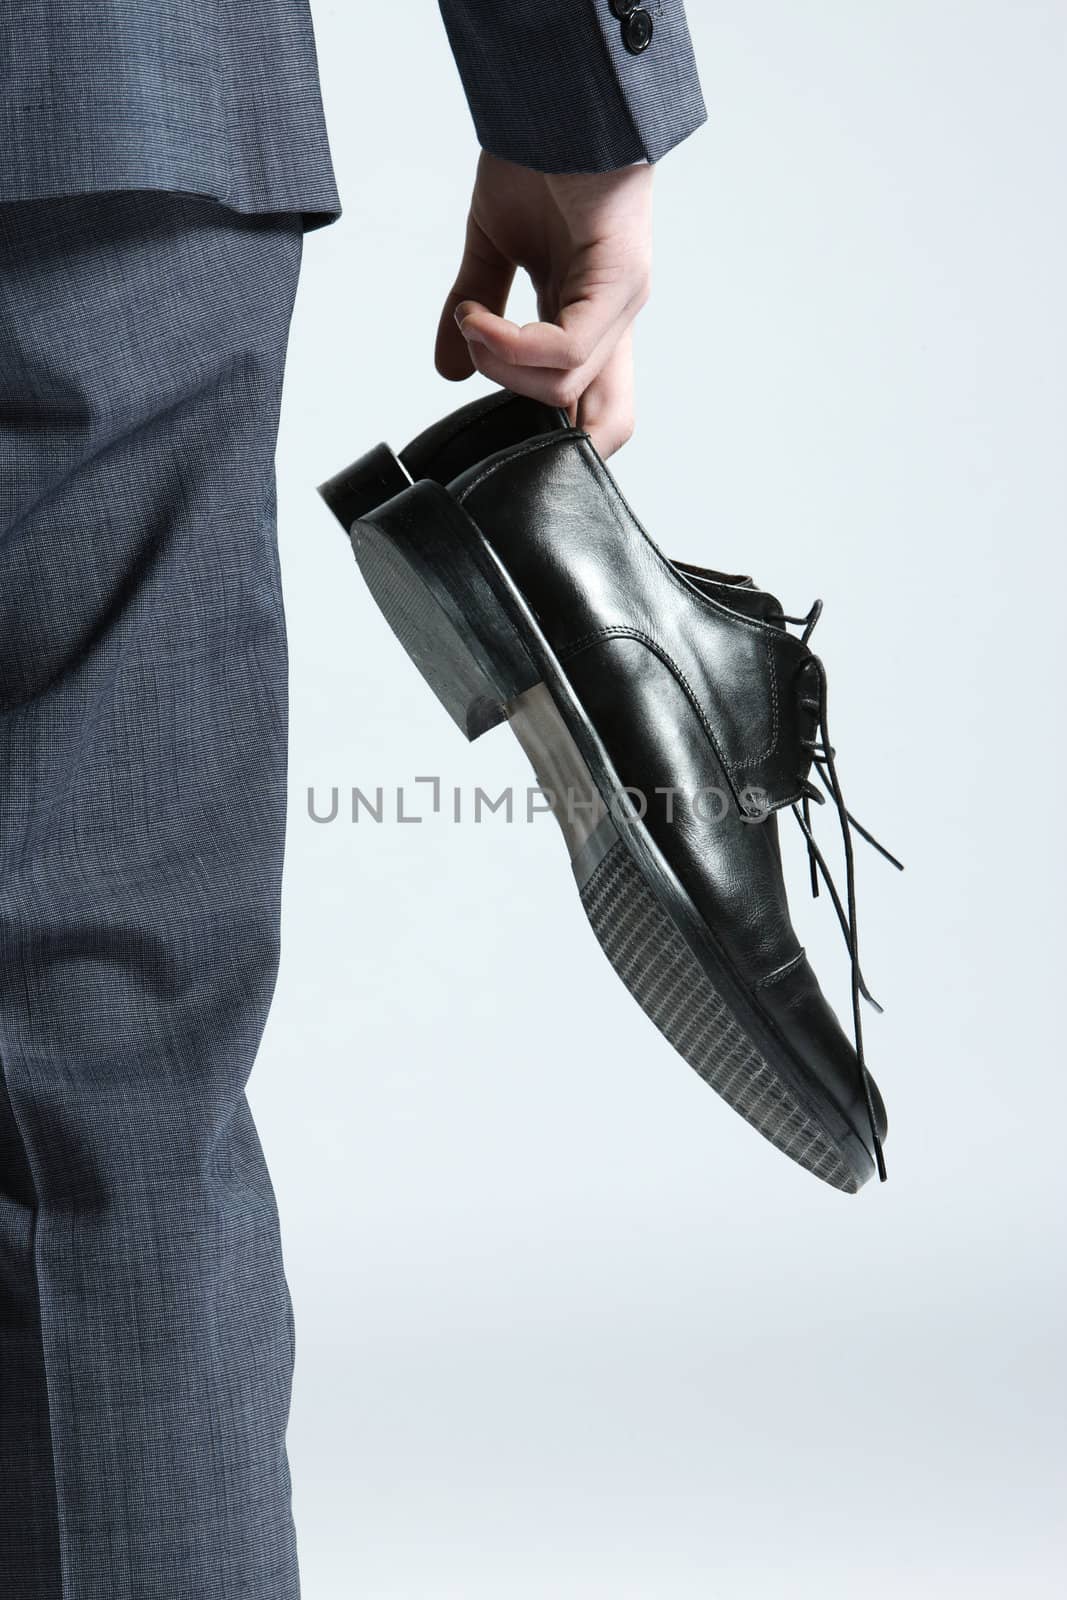 businessman holding the shoes in hand, close up by stokkete